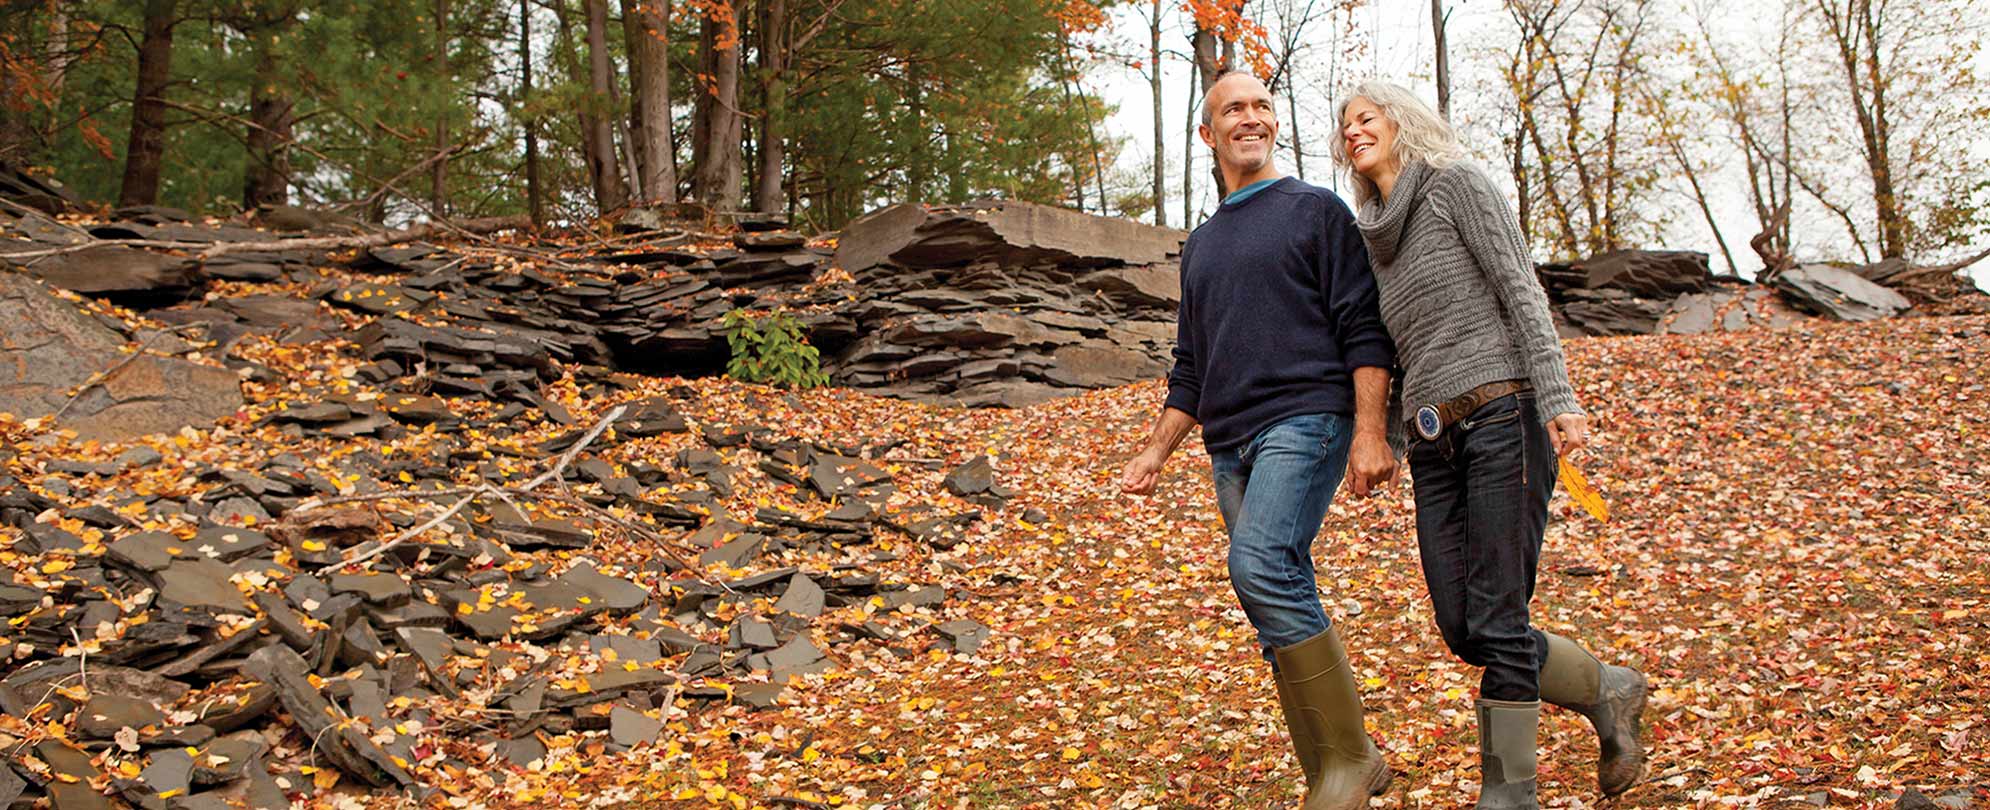 An older man and woman holding hands walk down a trail covered in fall leaves.